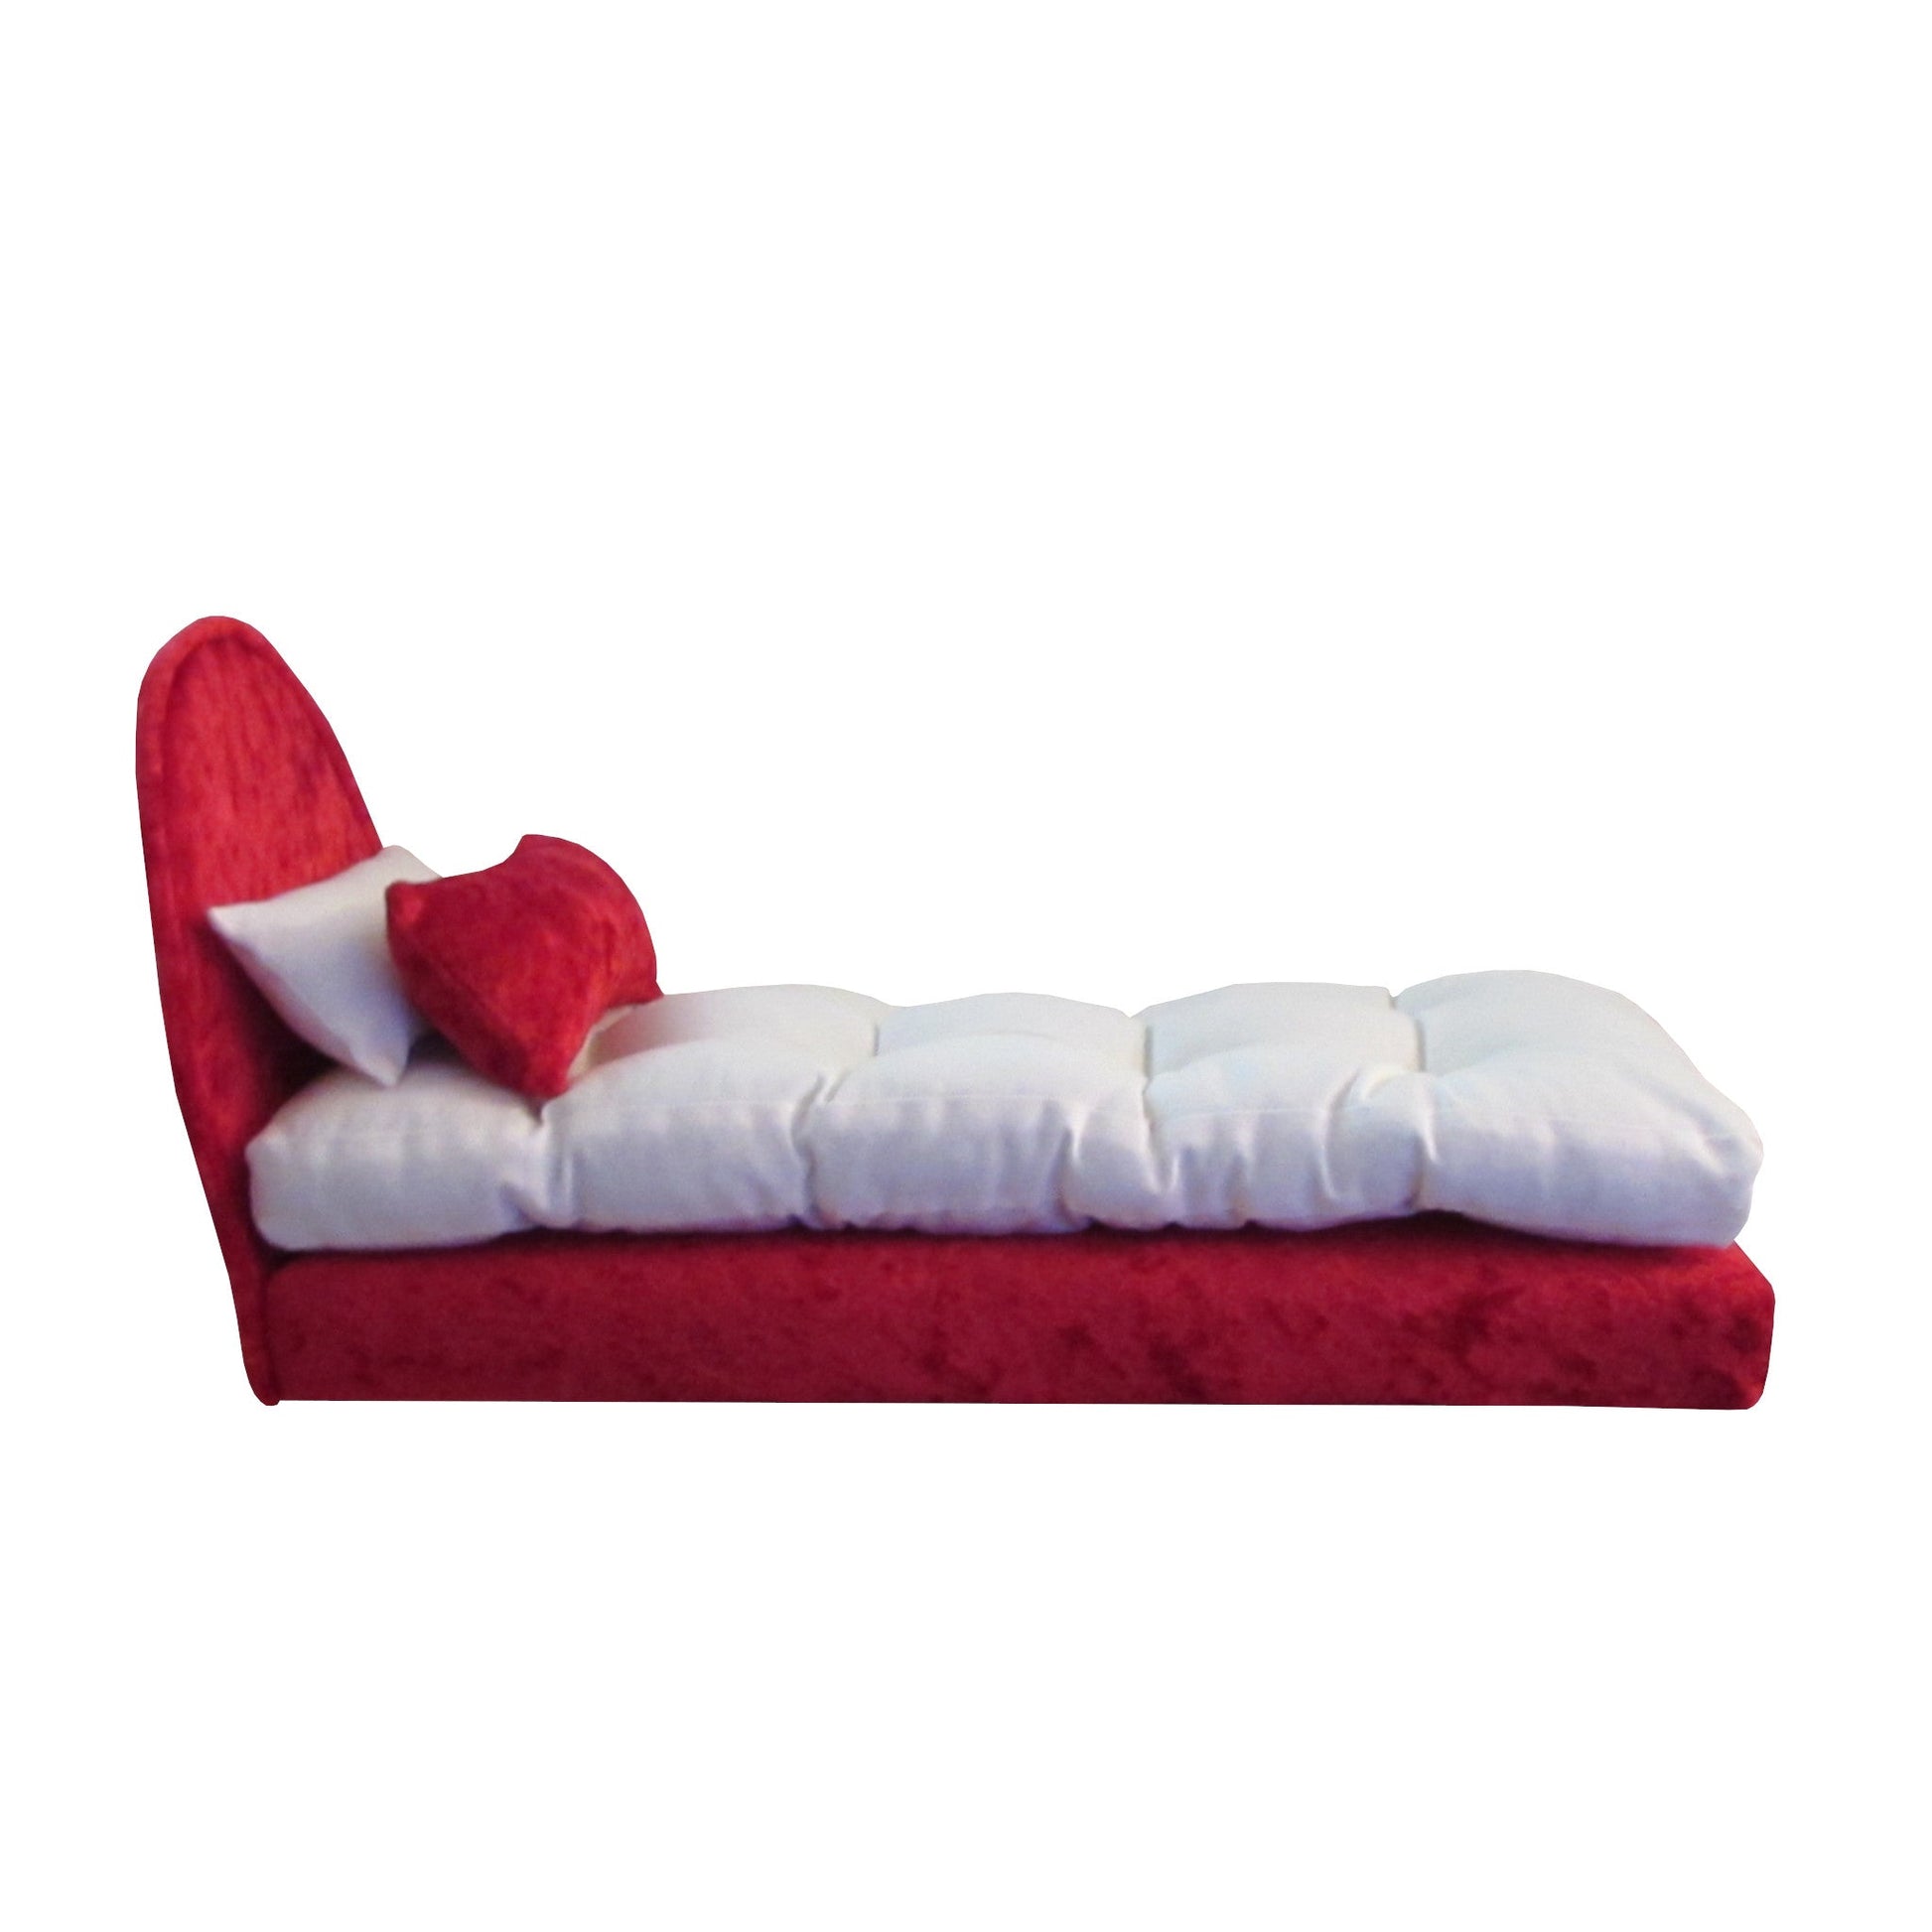 Red Crushed Velvet Doll Bed, Two Pillows, and Mattress for 11.5-inch and 12-inch dolls Side view